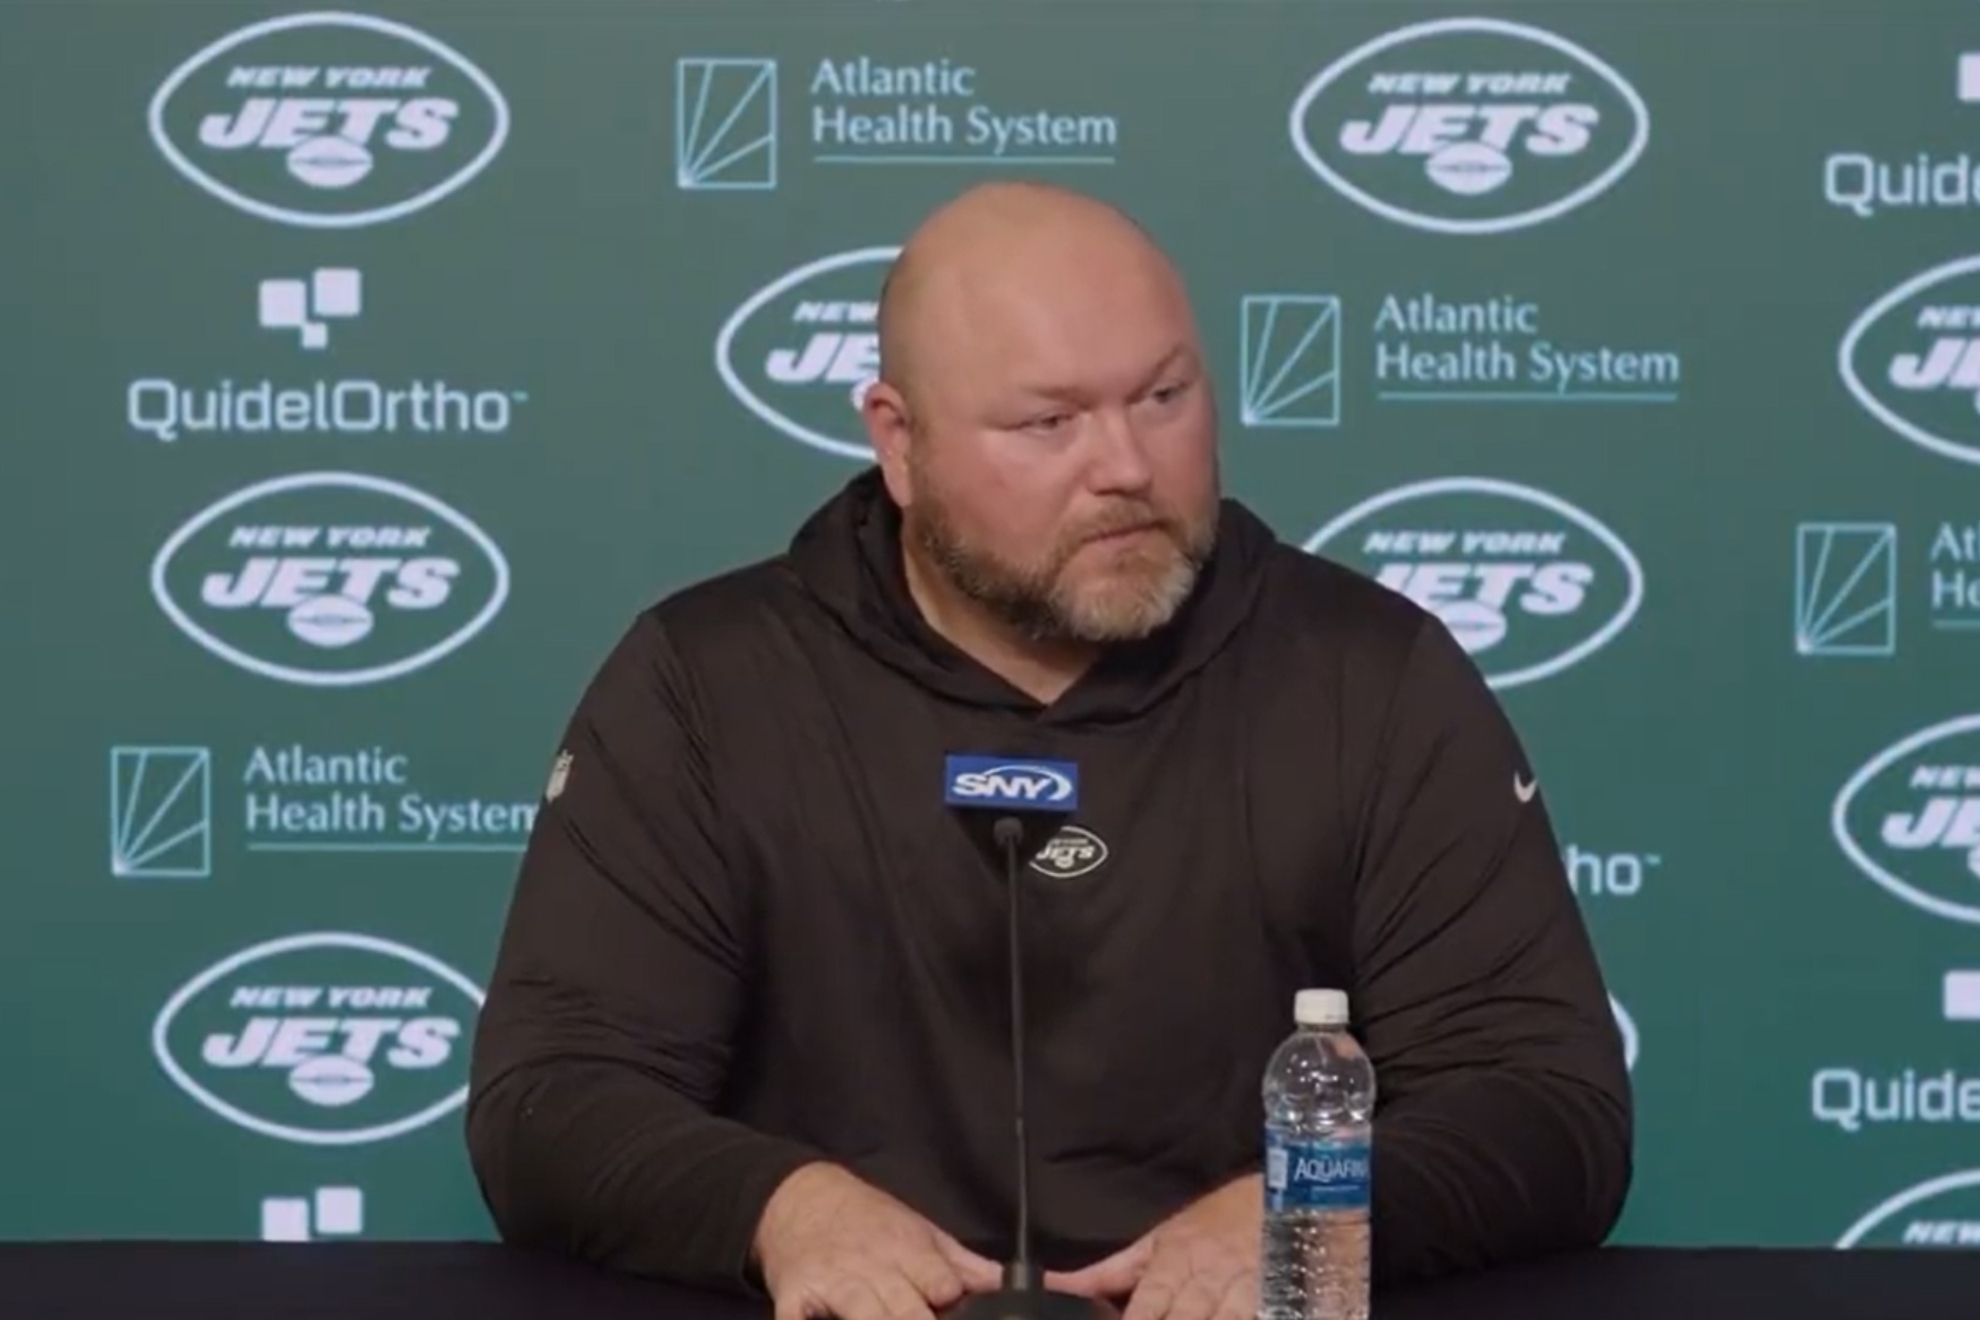 Joe Douglas is being cautiously optimistic about the QB's return